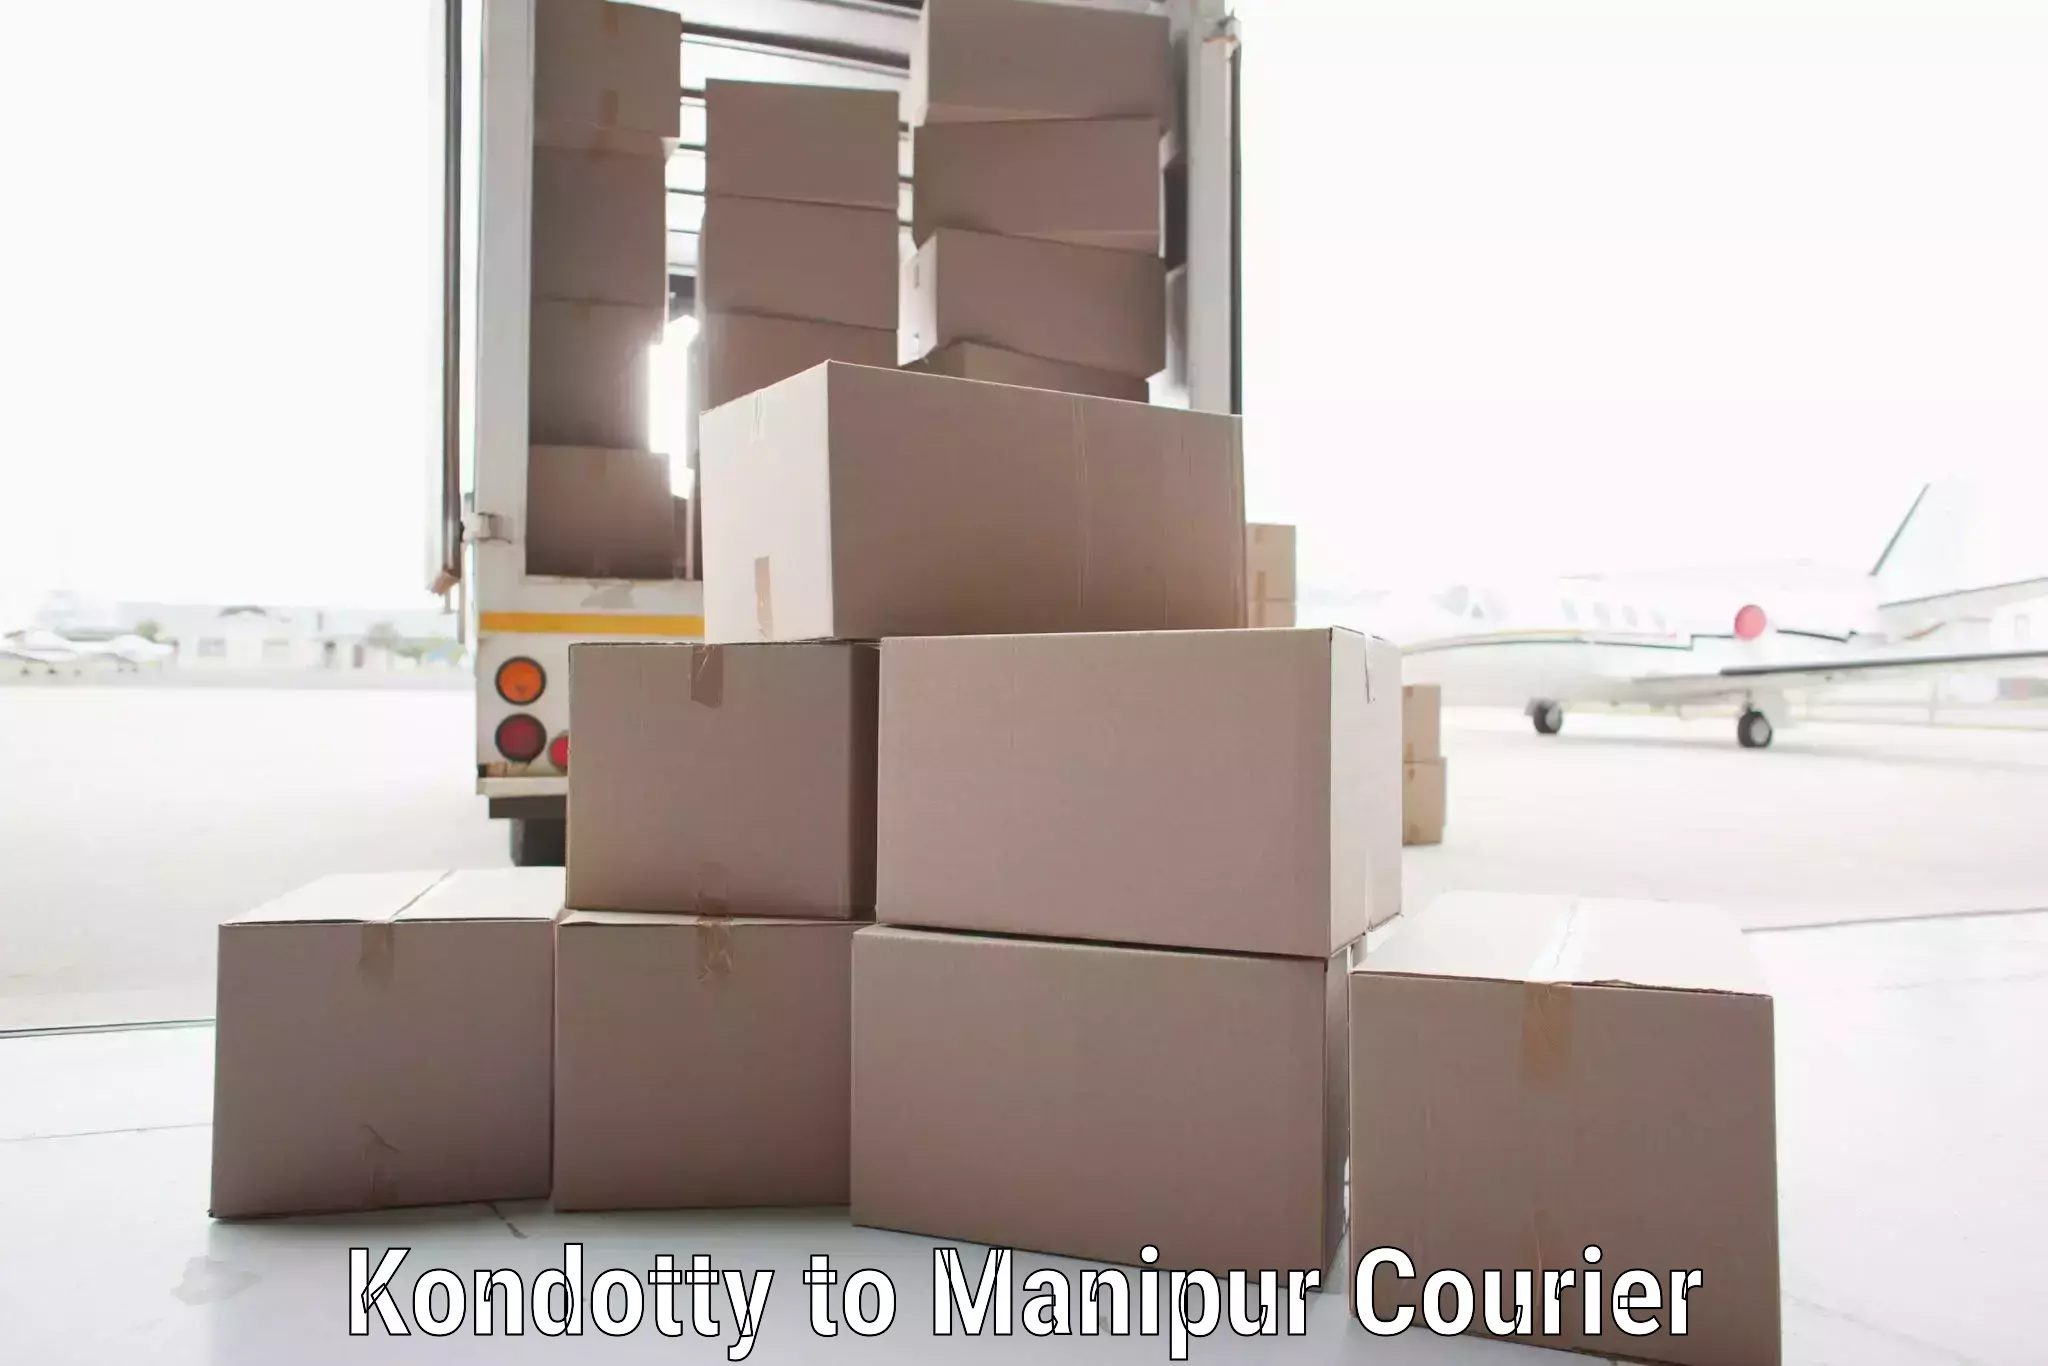 Global shipping networks Kondotty to Imphal